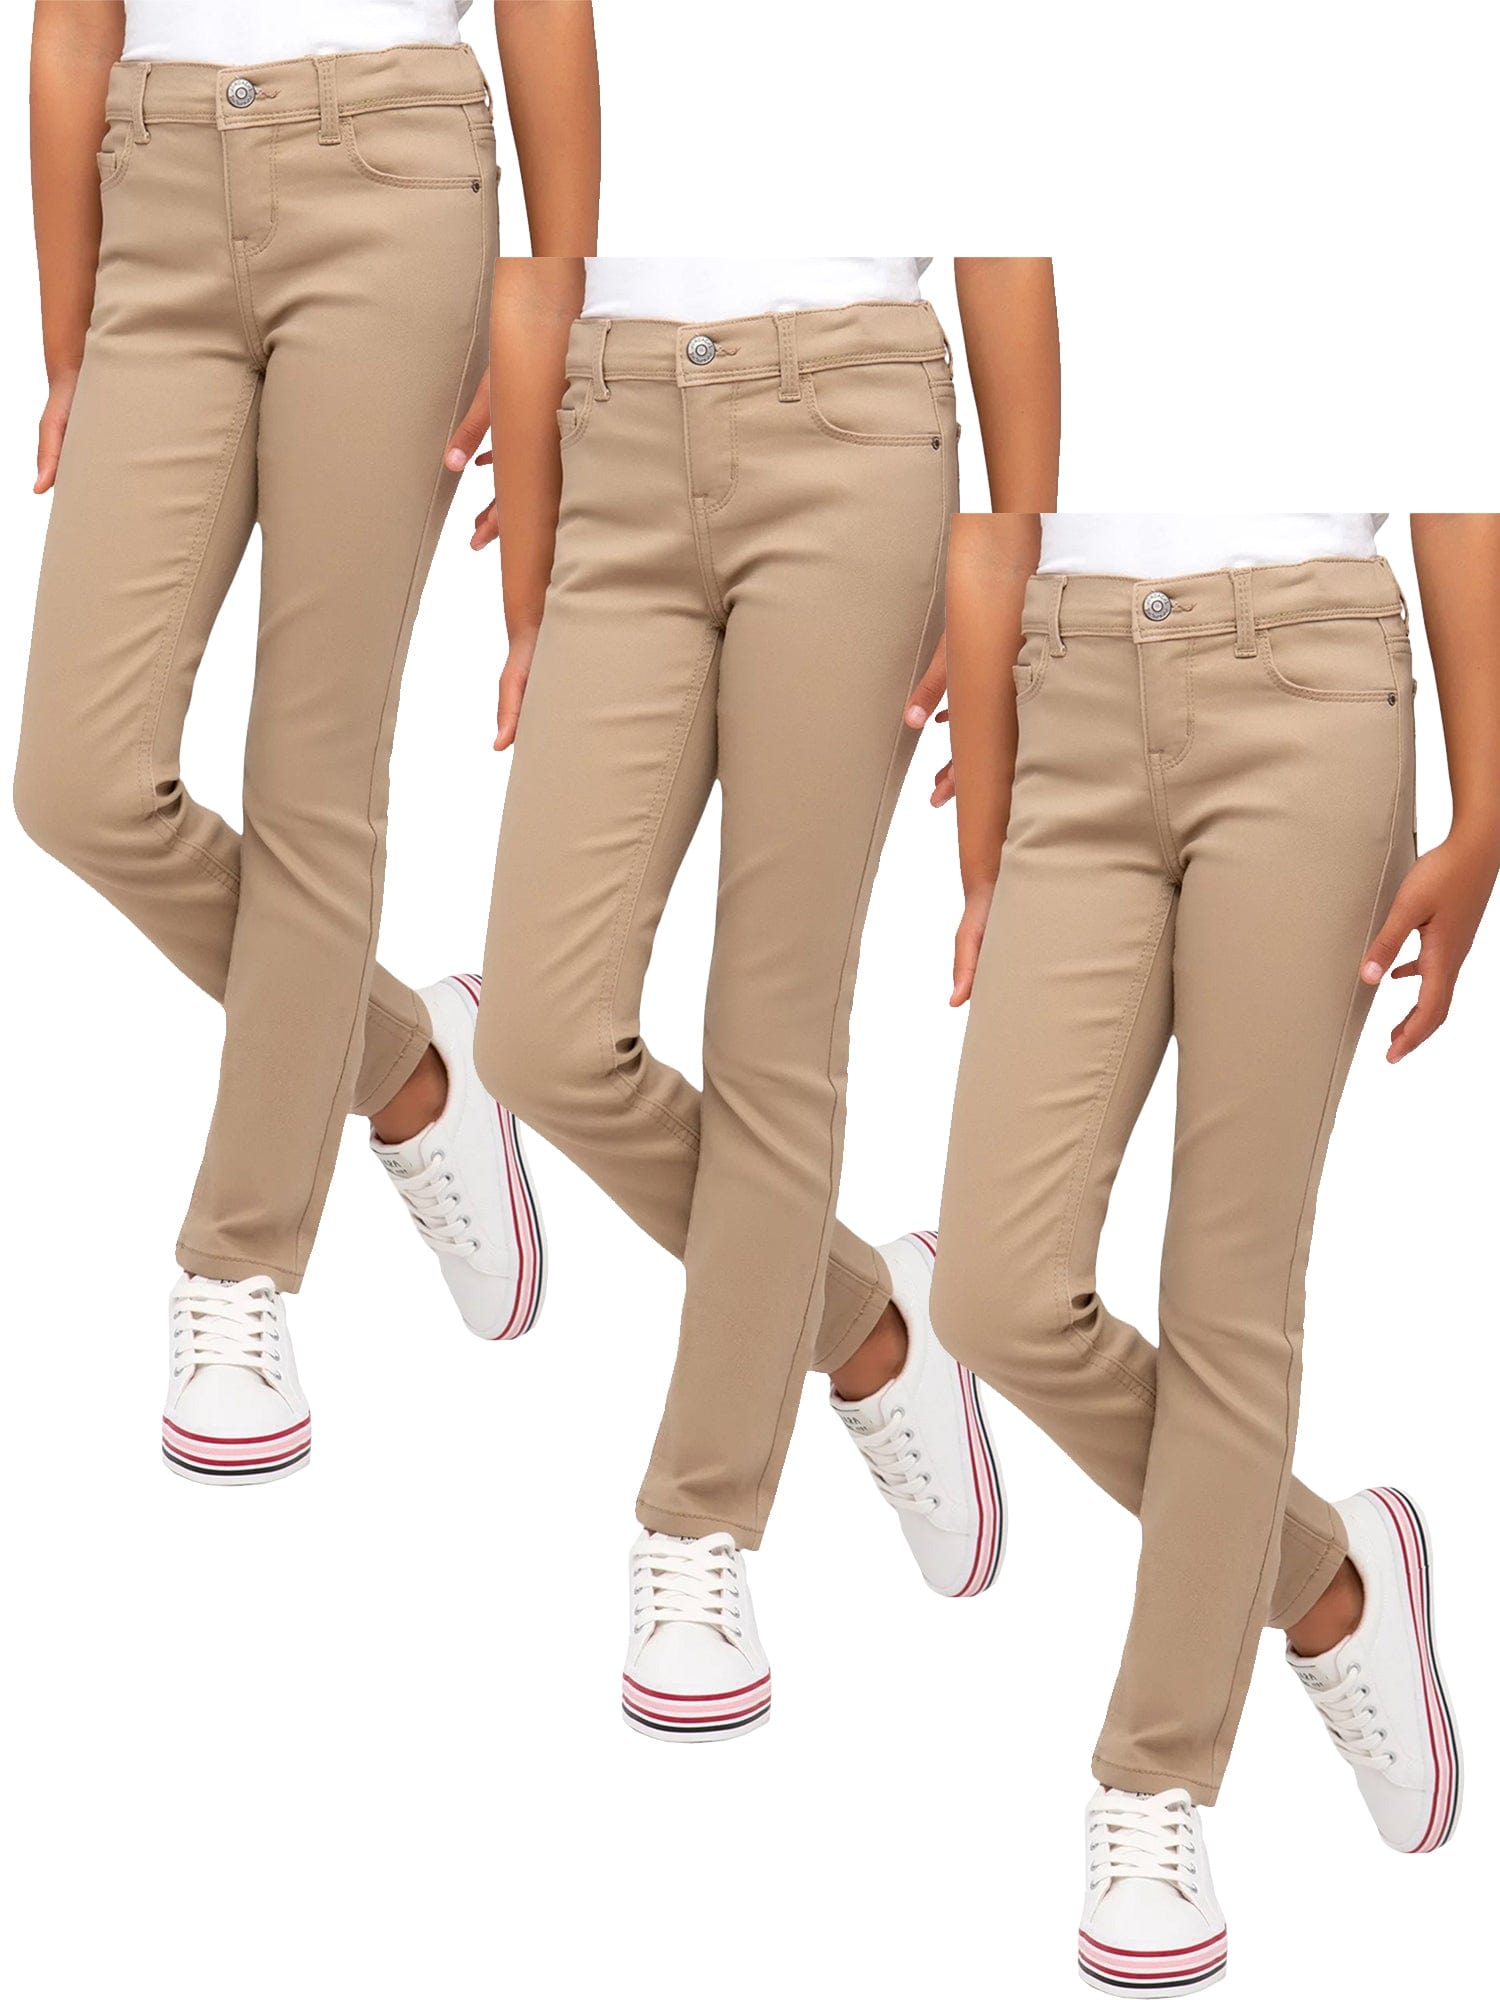 Girl's (3-PACK) Stretch Pencil Skinny Uniform Pants - GalaxybyHarvic